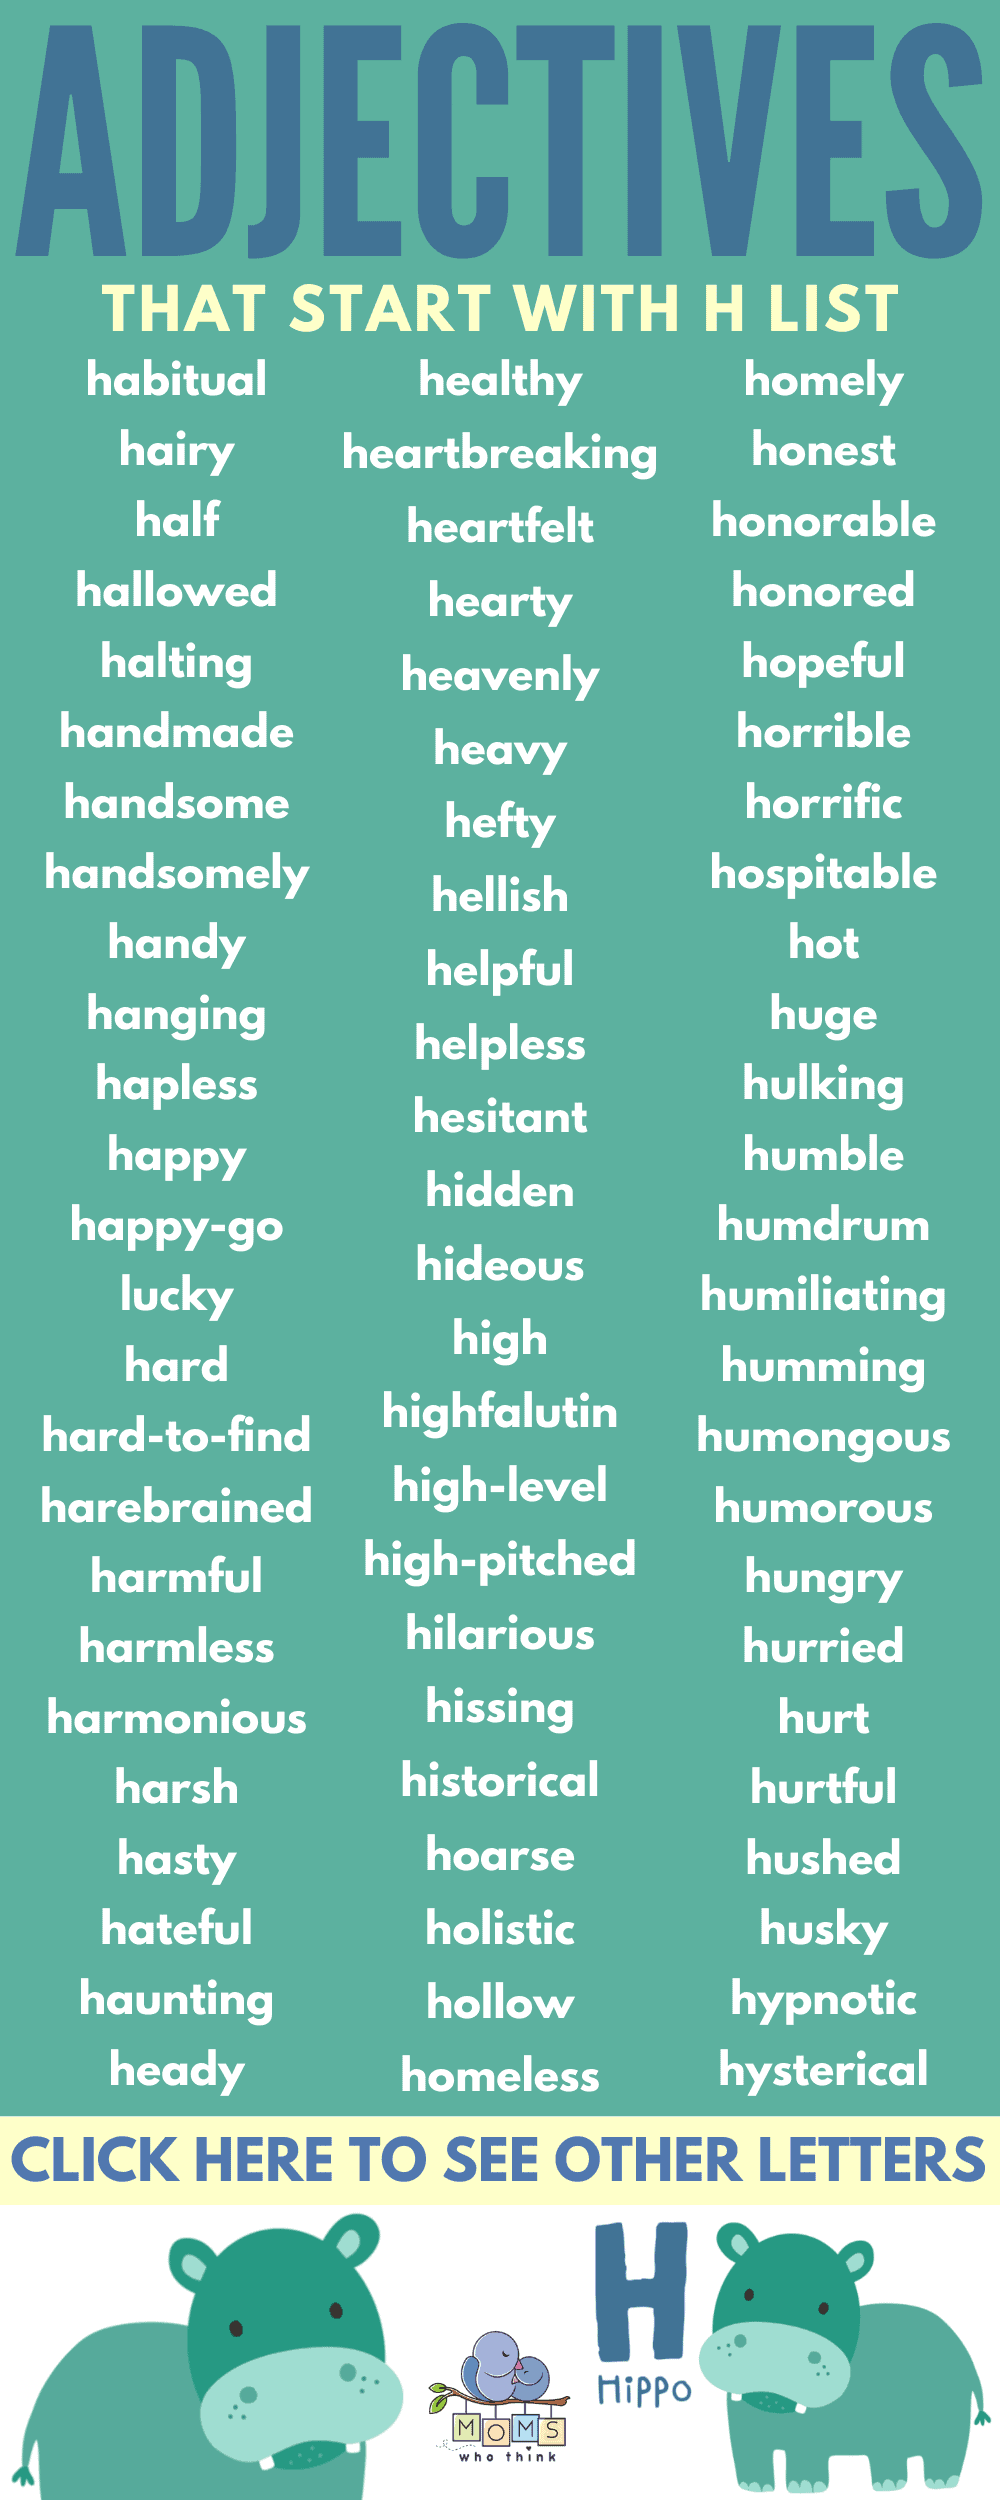 adjectives-that-start-with-a-to-z-list